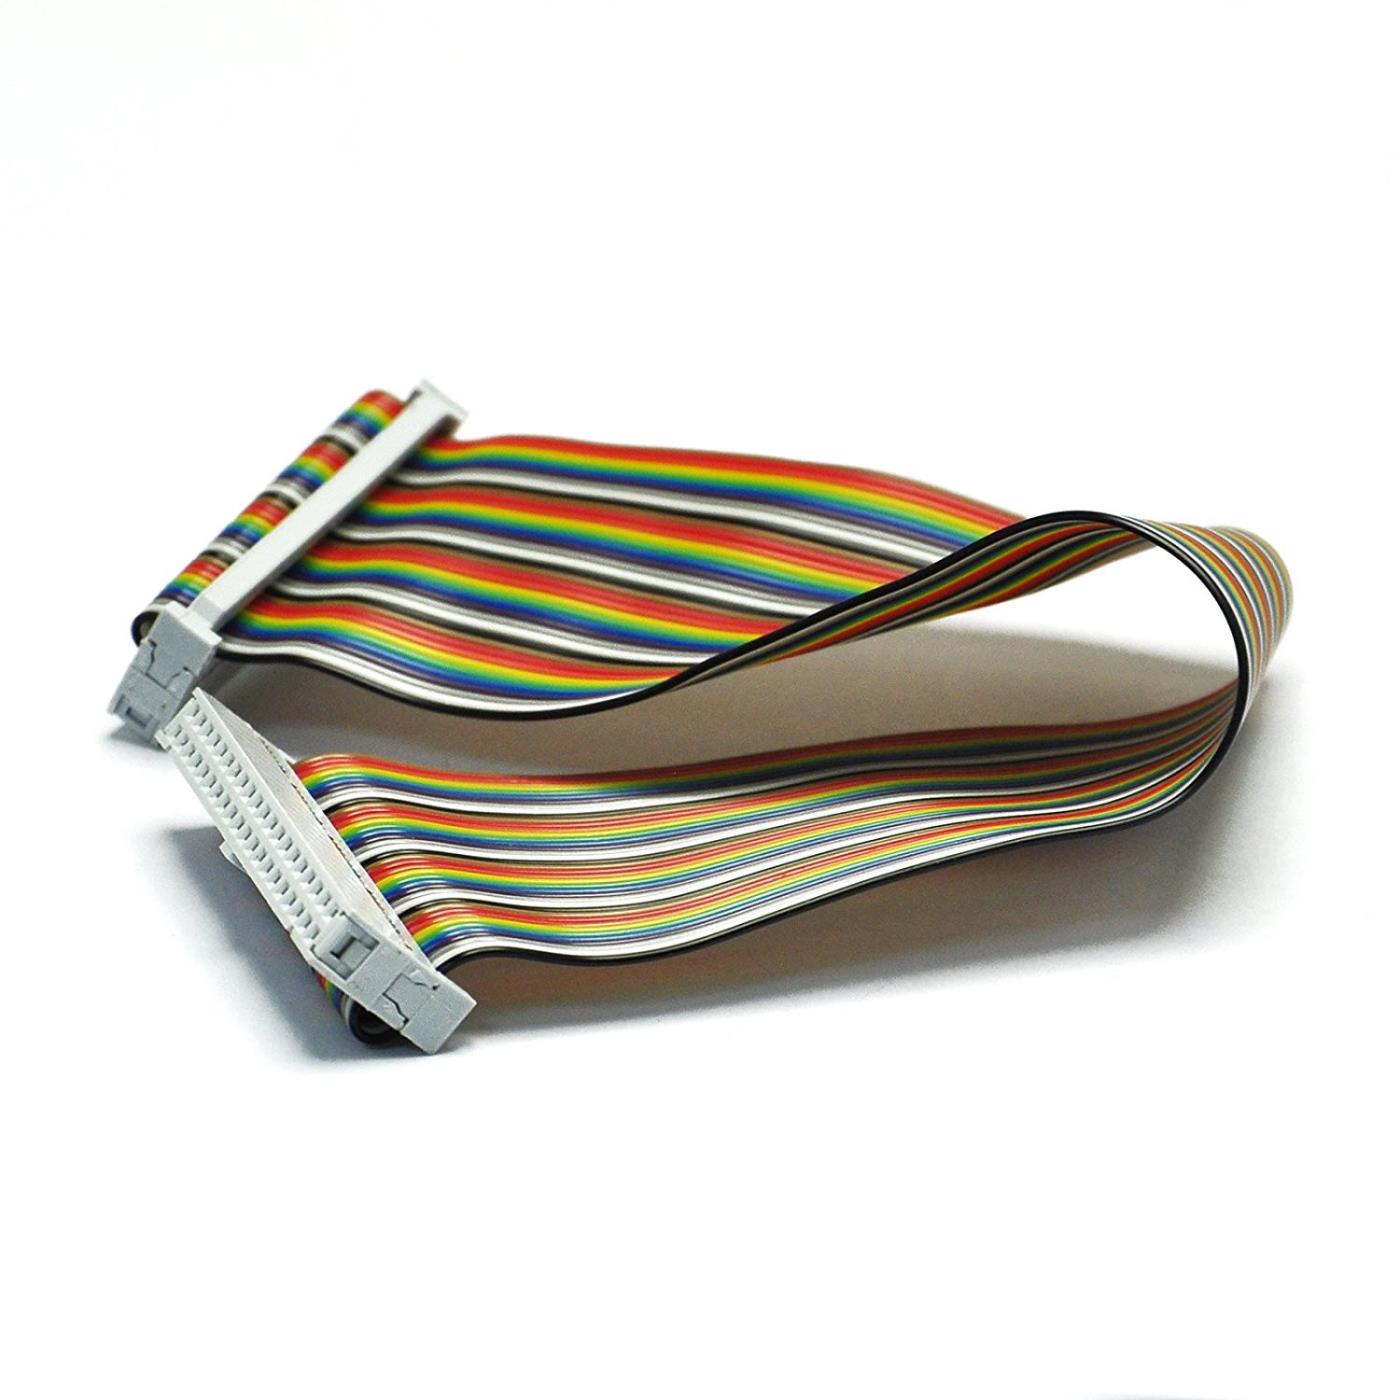 40P 20cm GPIO Ribbon Cable 2.54mm pitch for Raspberry Pi model B+